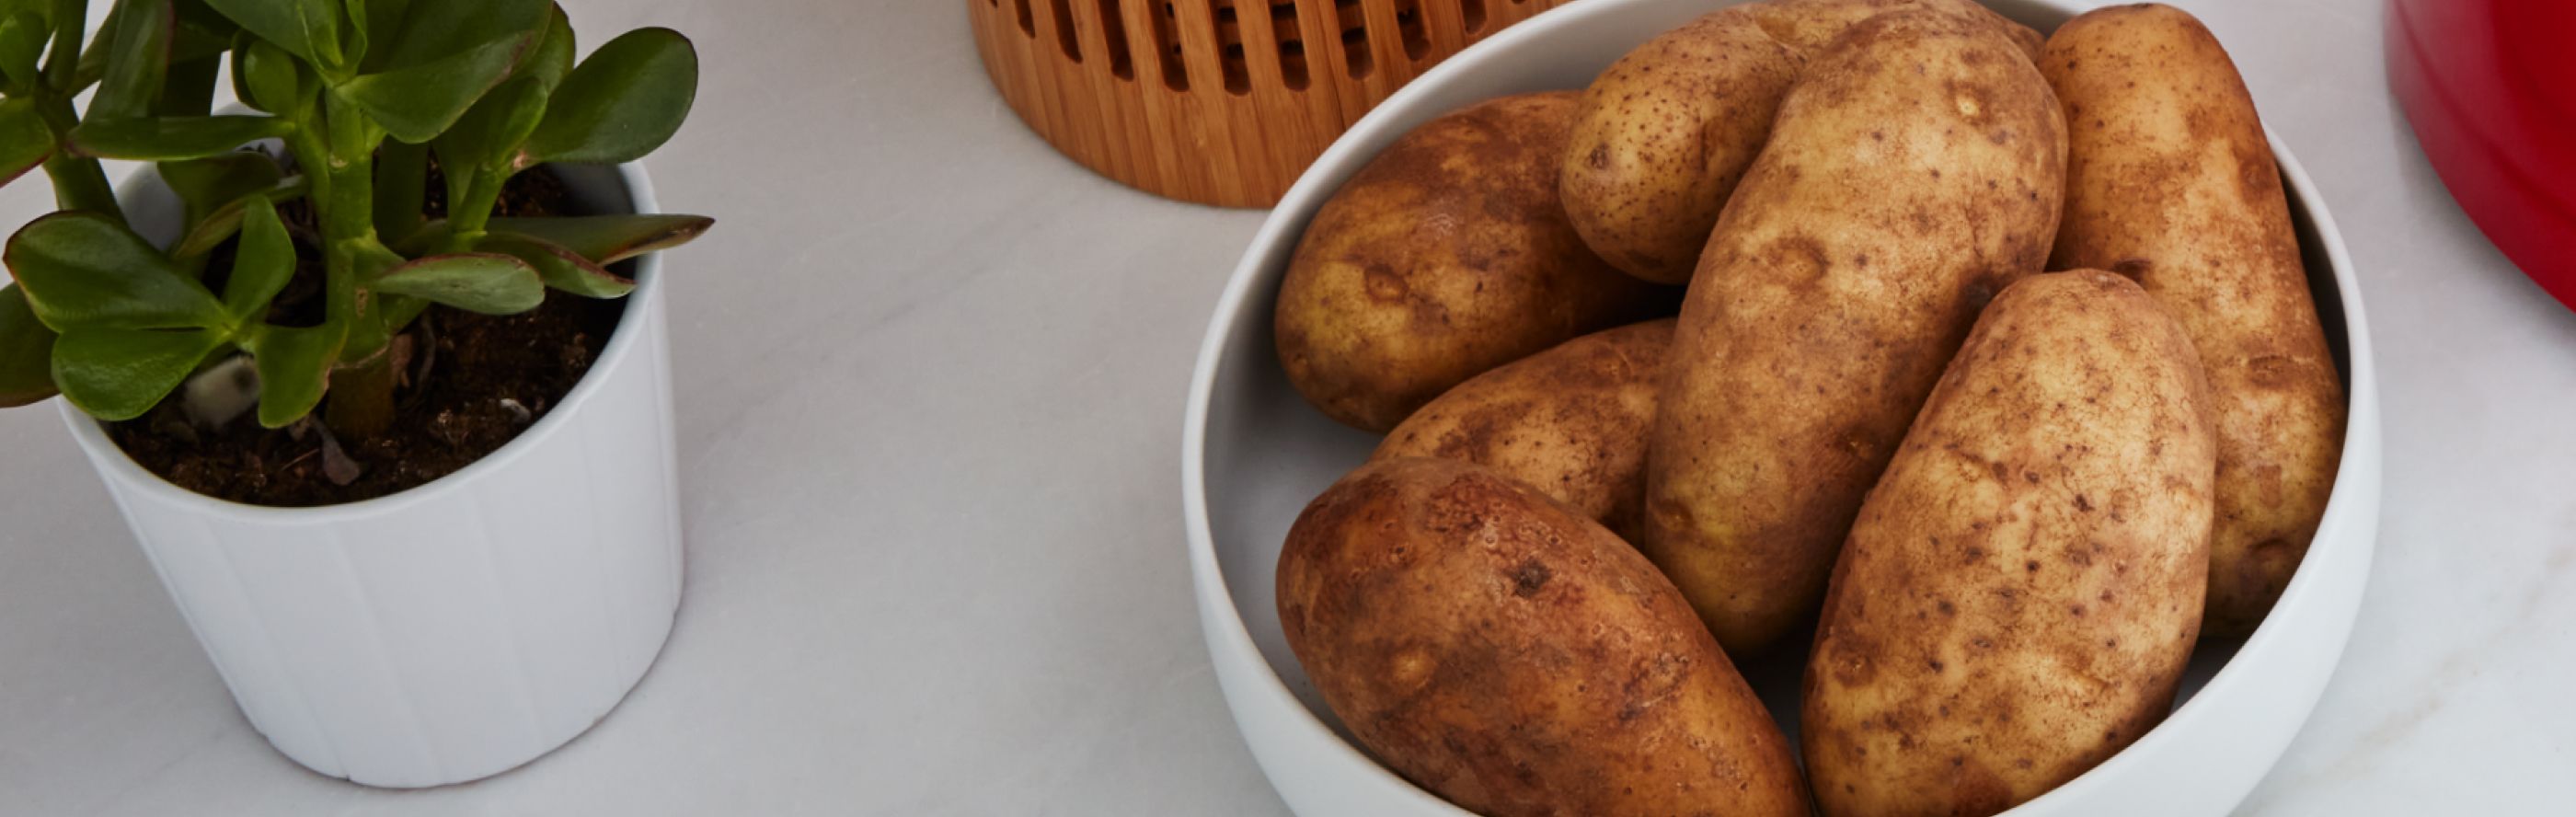 Baked potatoes in a dish on countertop